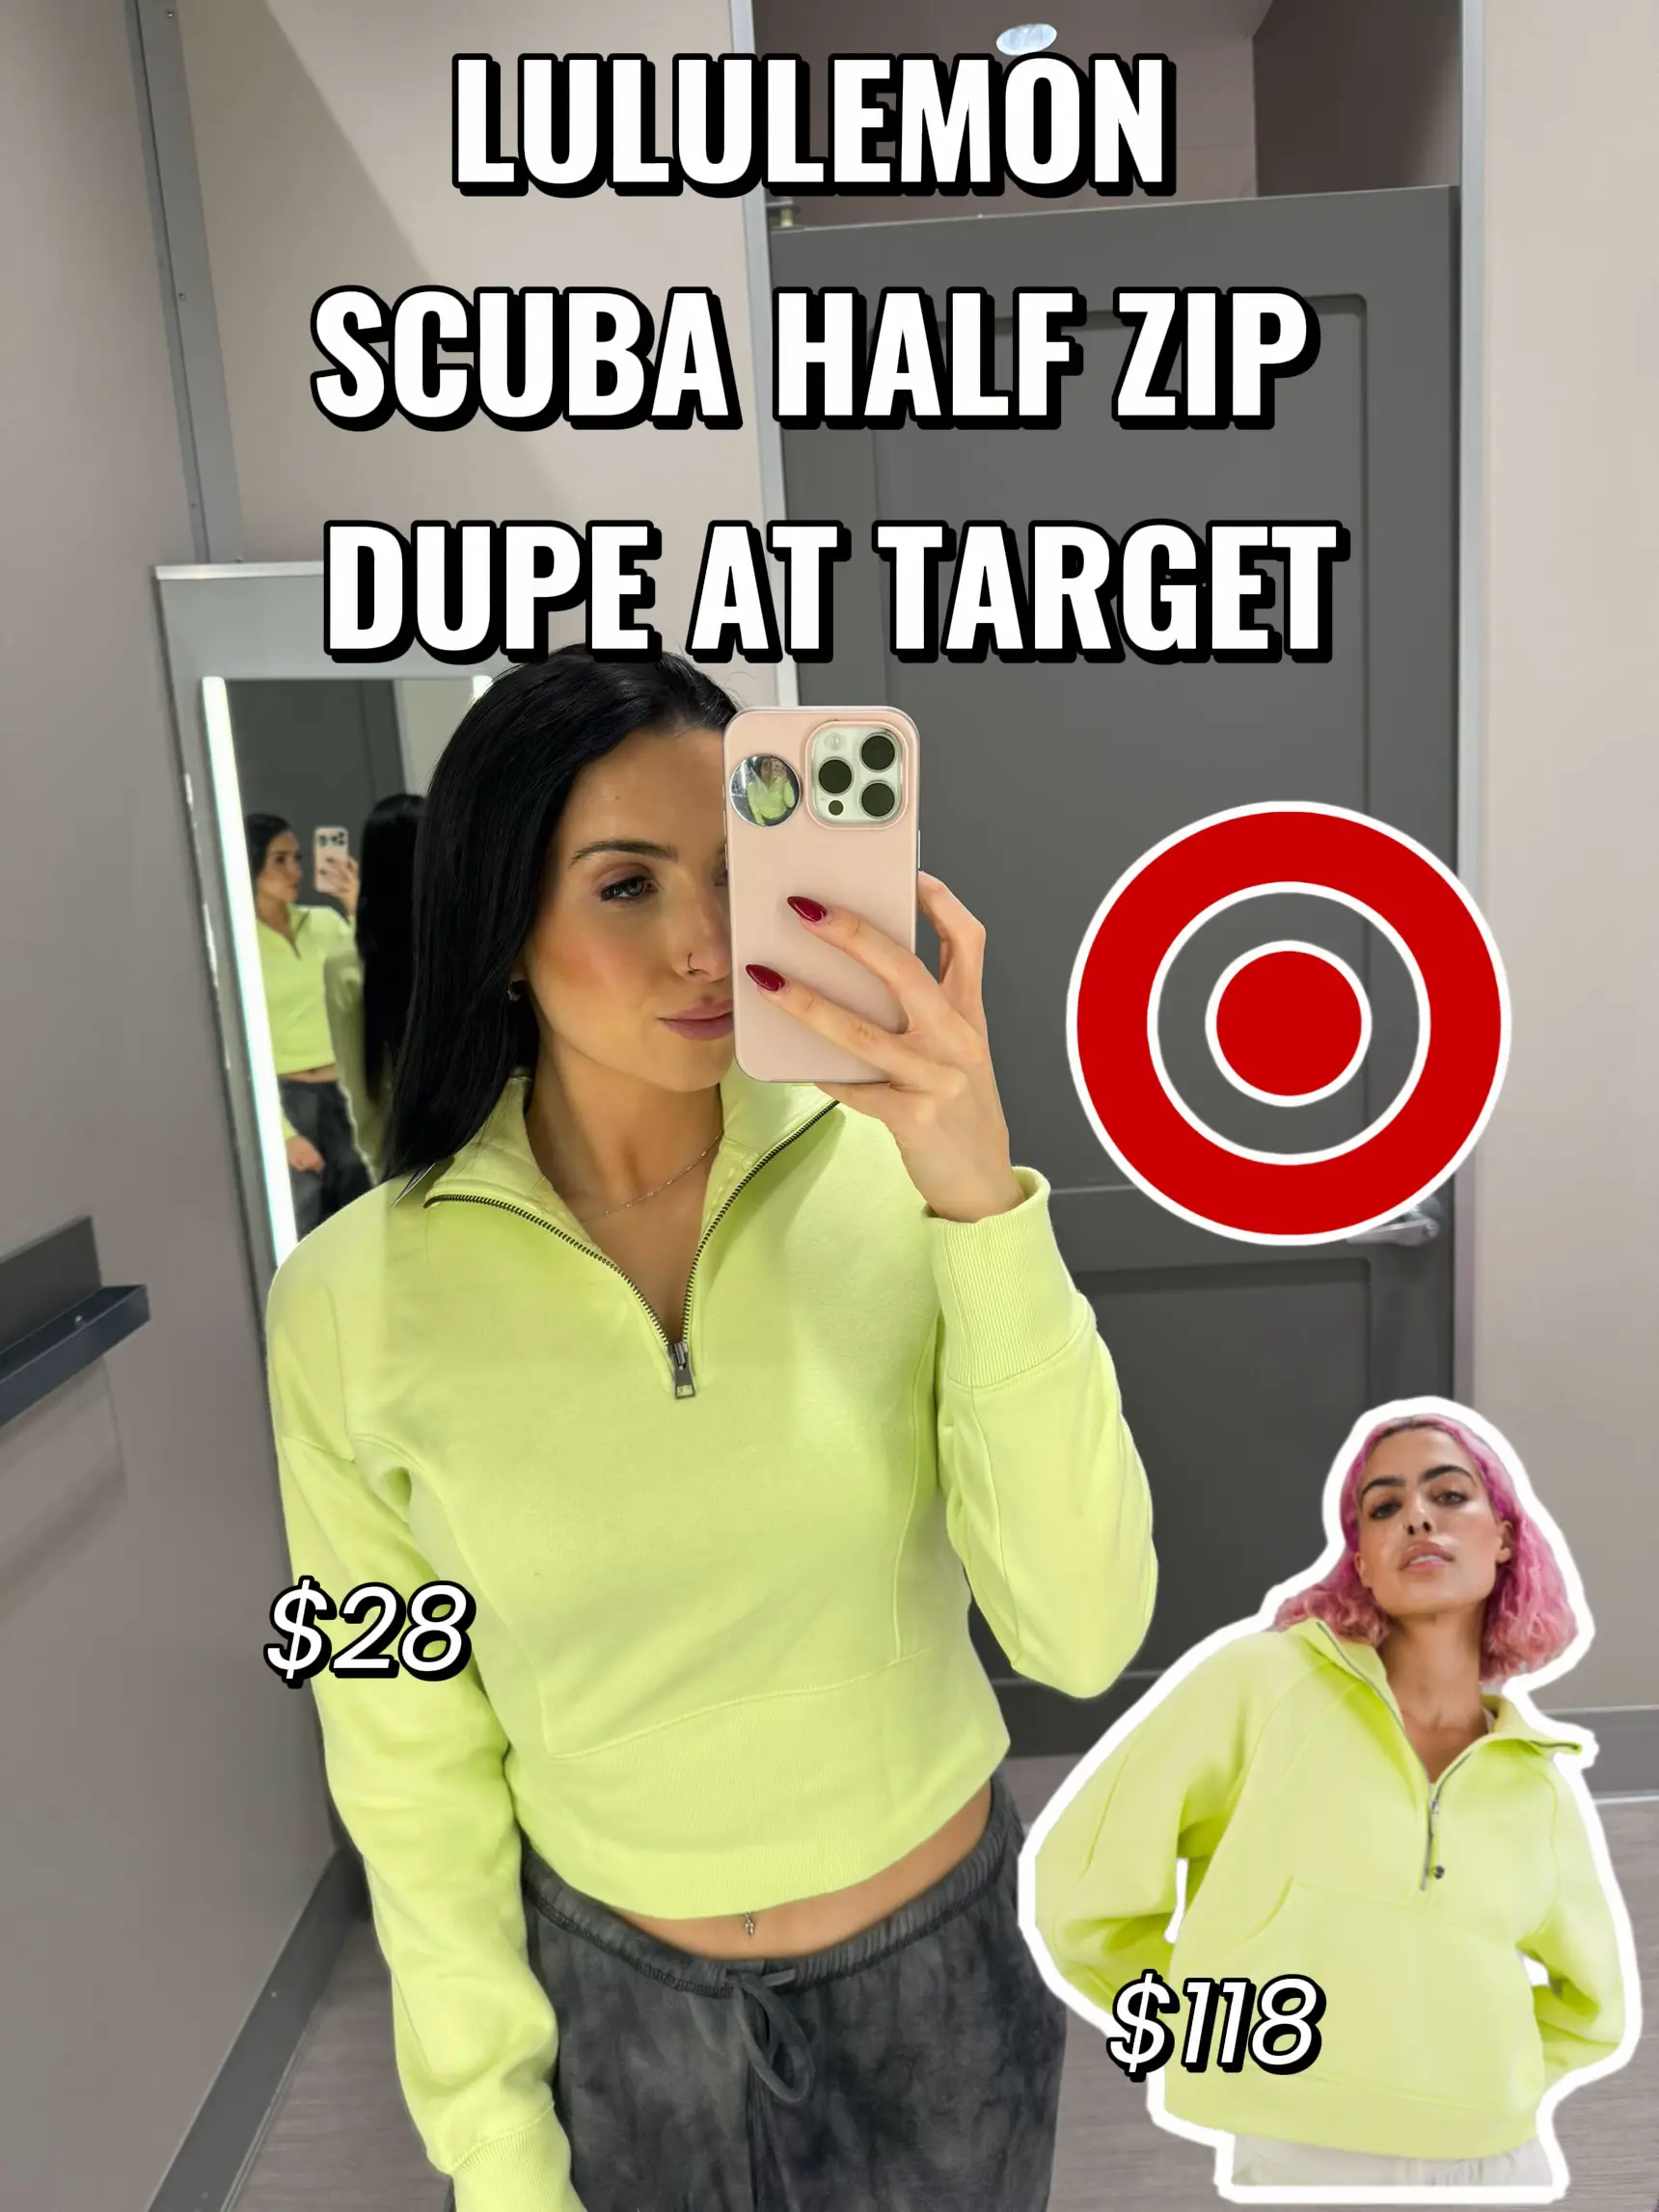 Lululemon dupes from Target